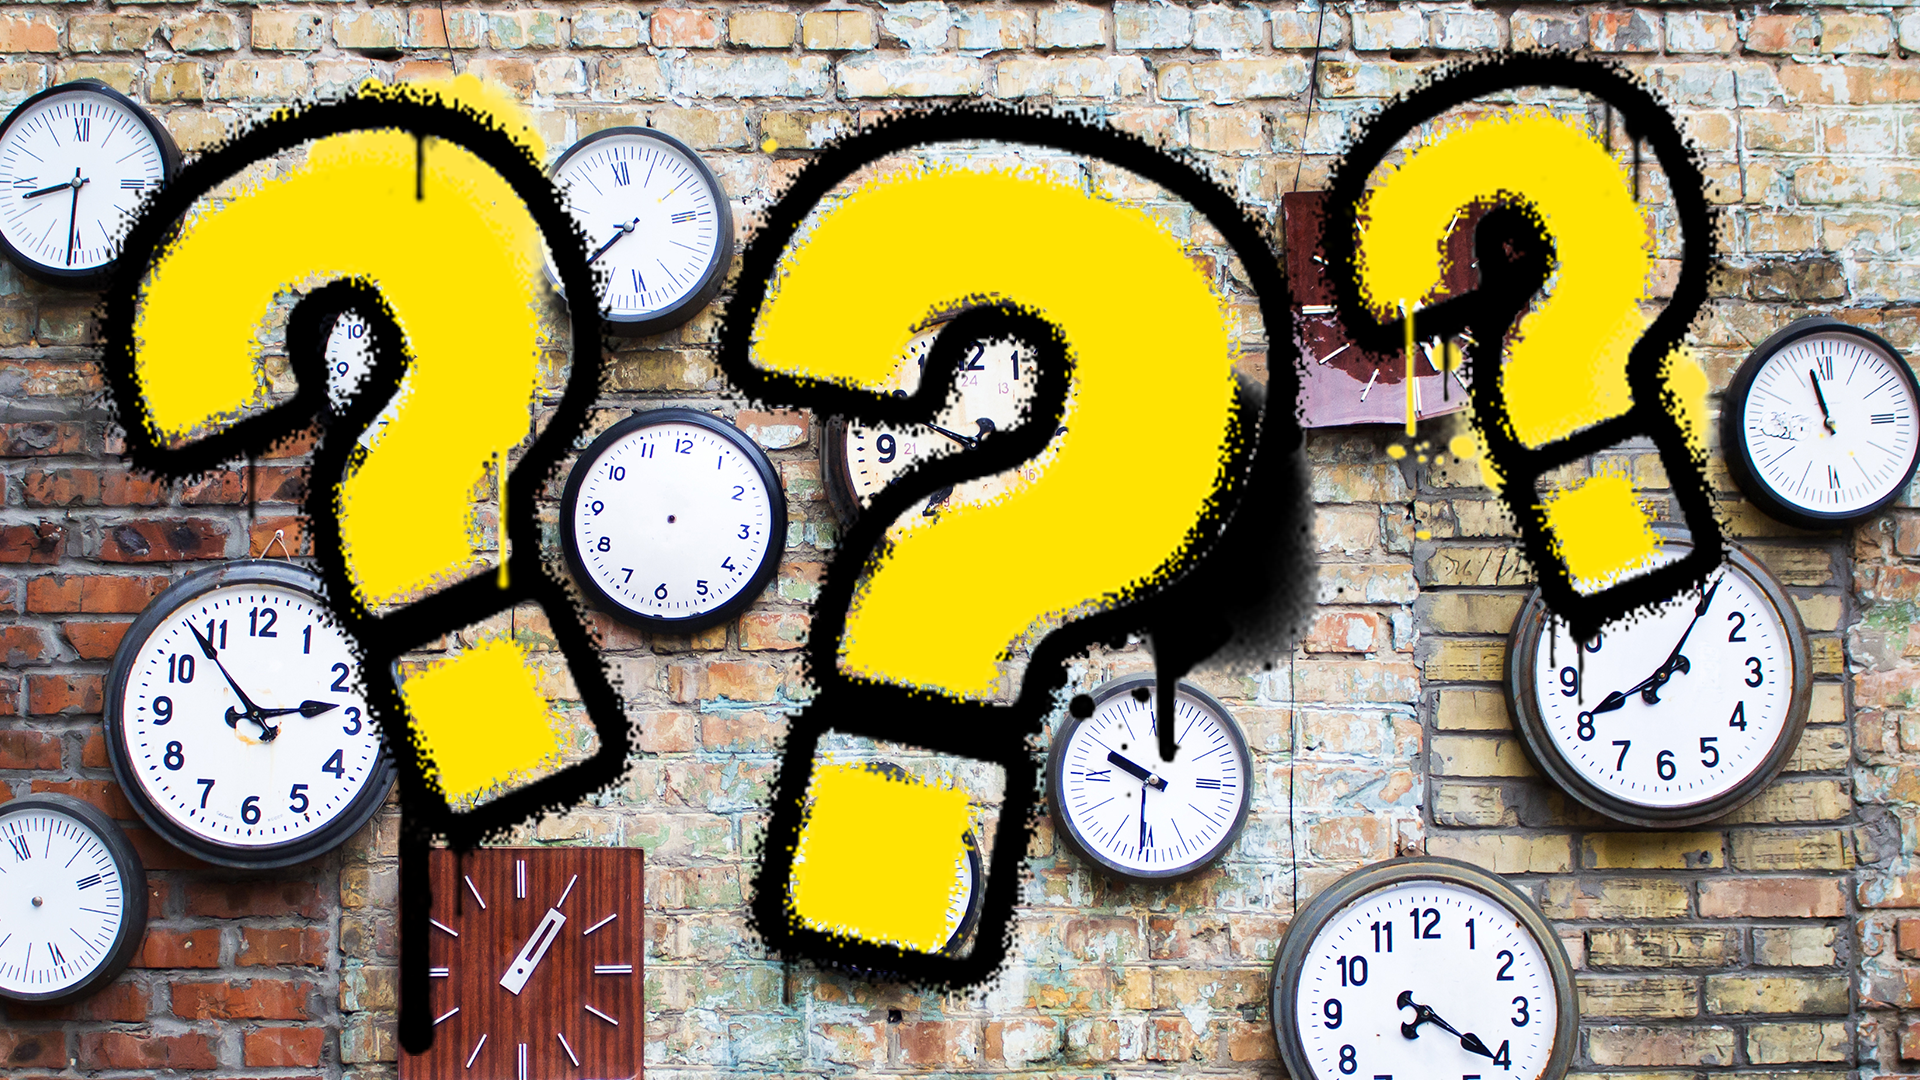 Clocks and question marks